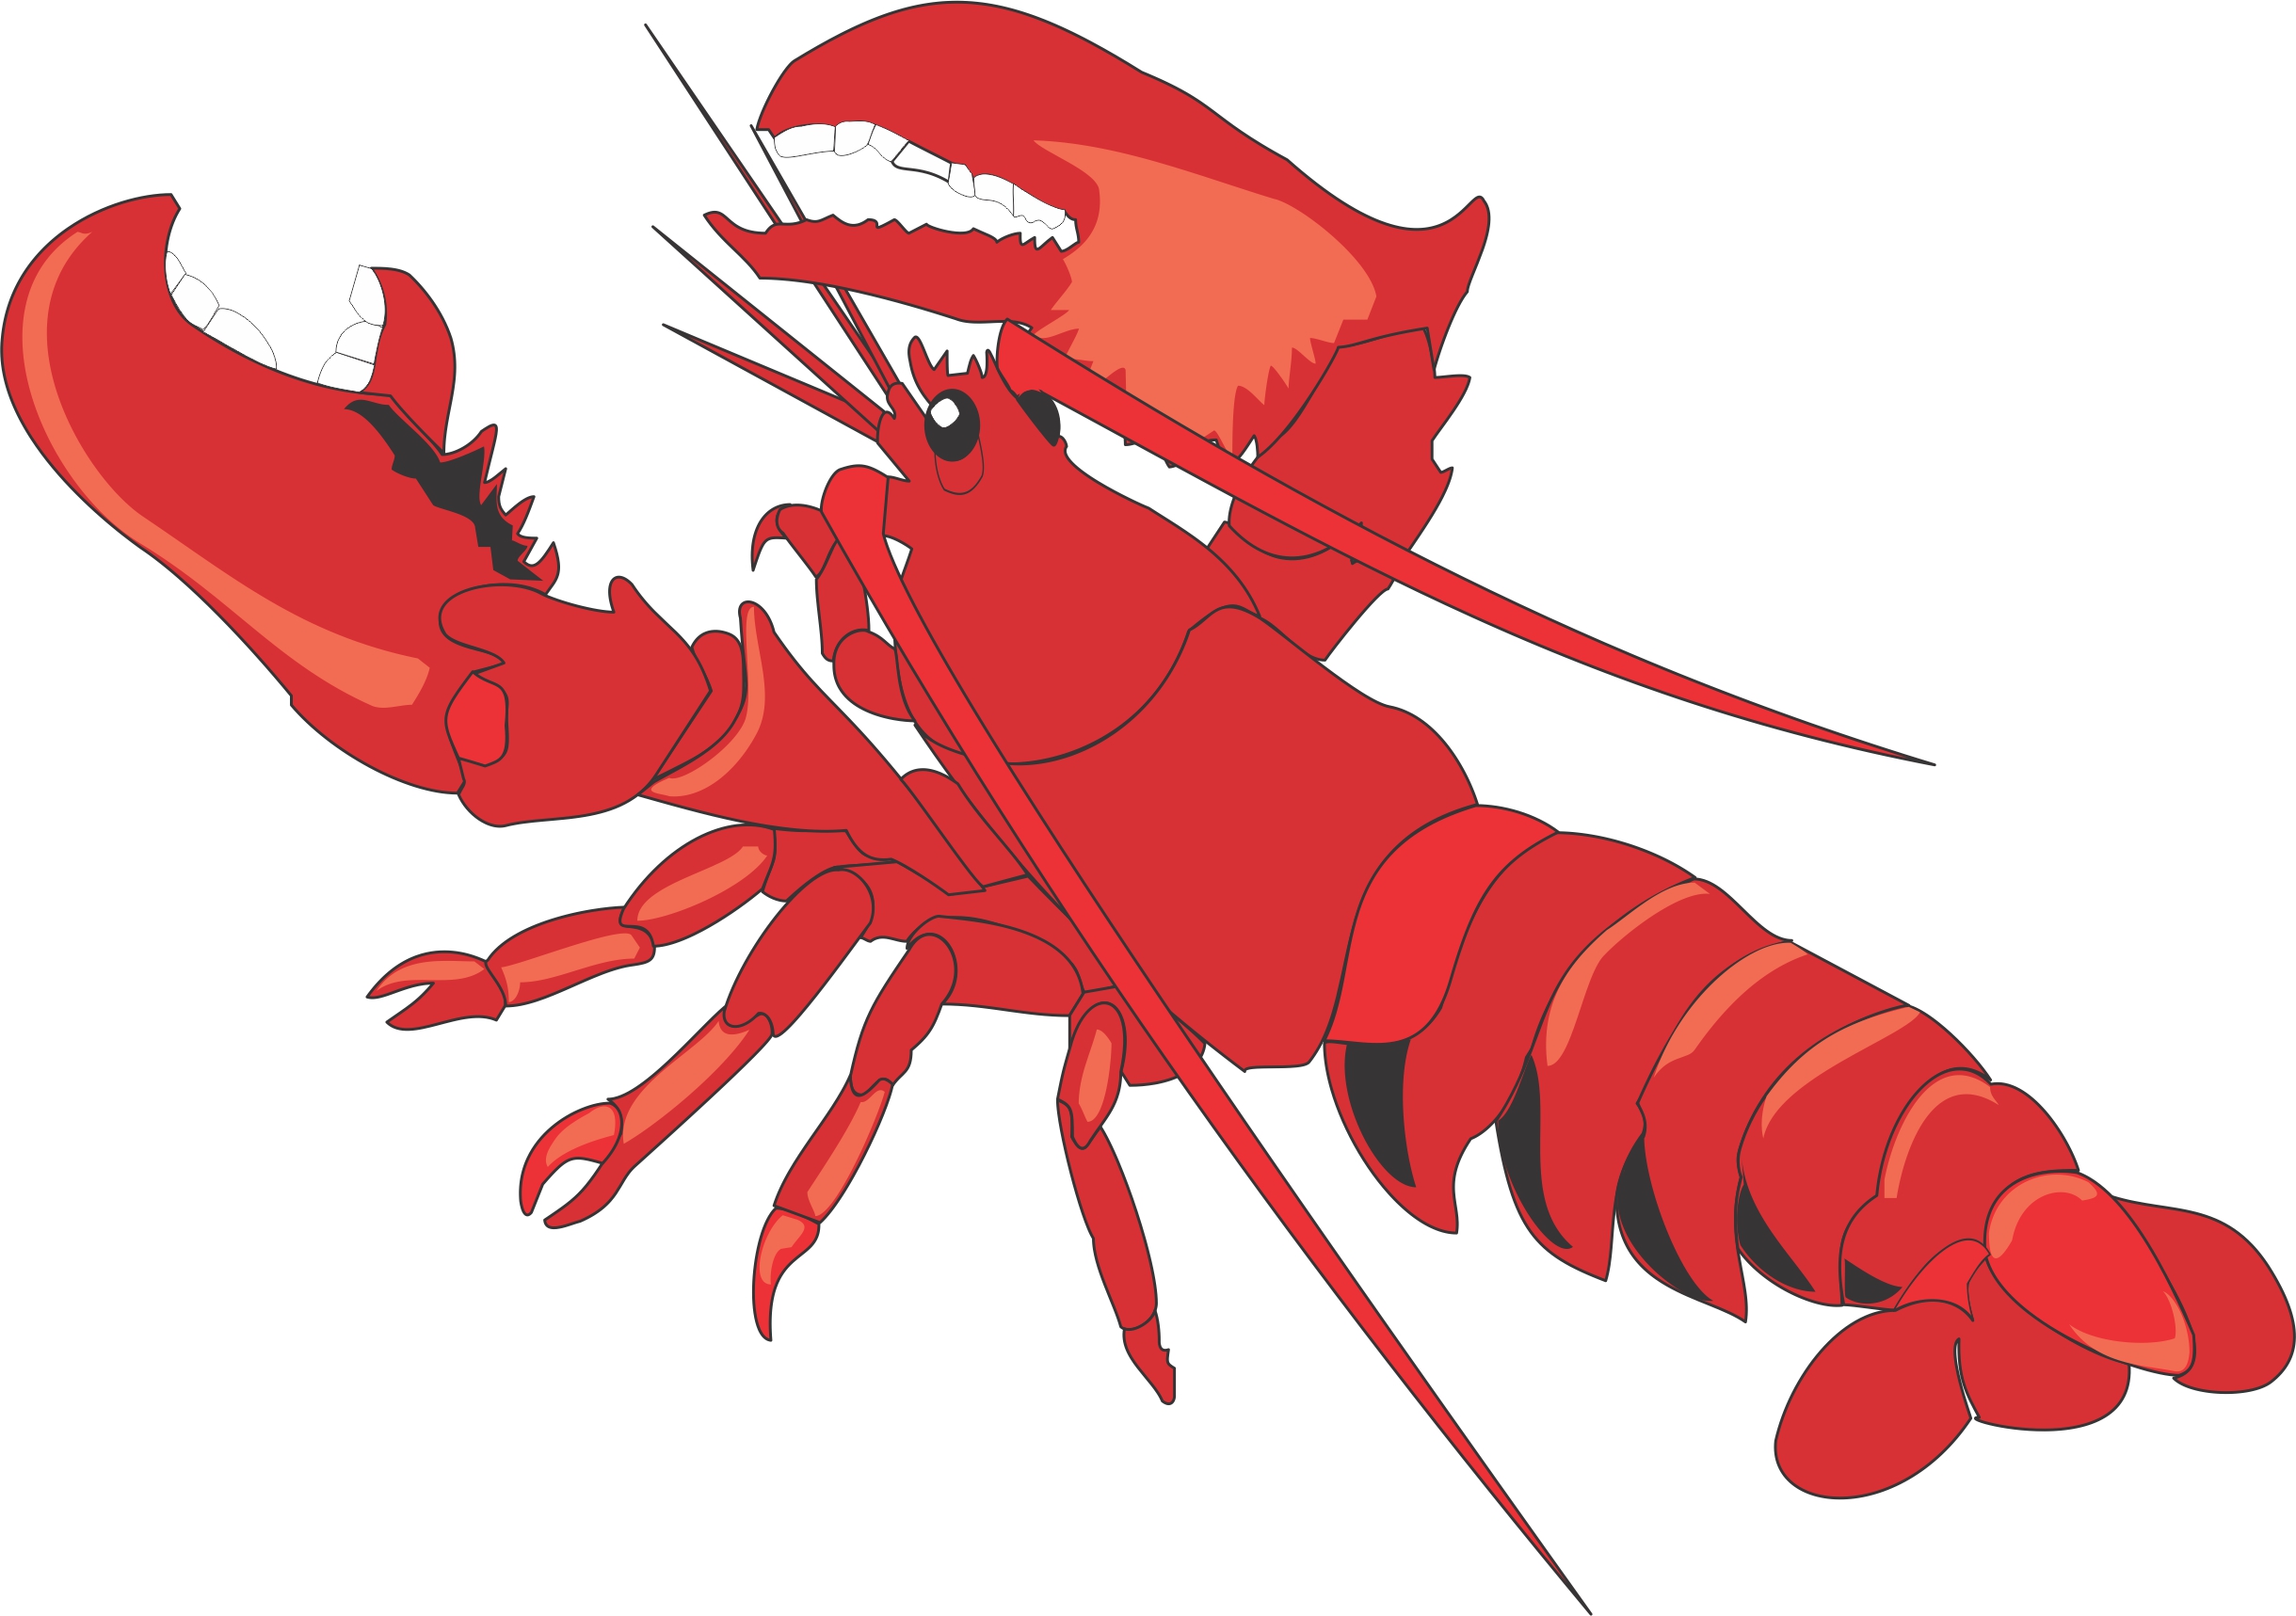 Lobster Clip Art Or Cartoons | Clipart library - Free Clipart Images